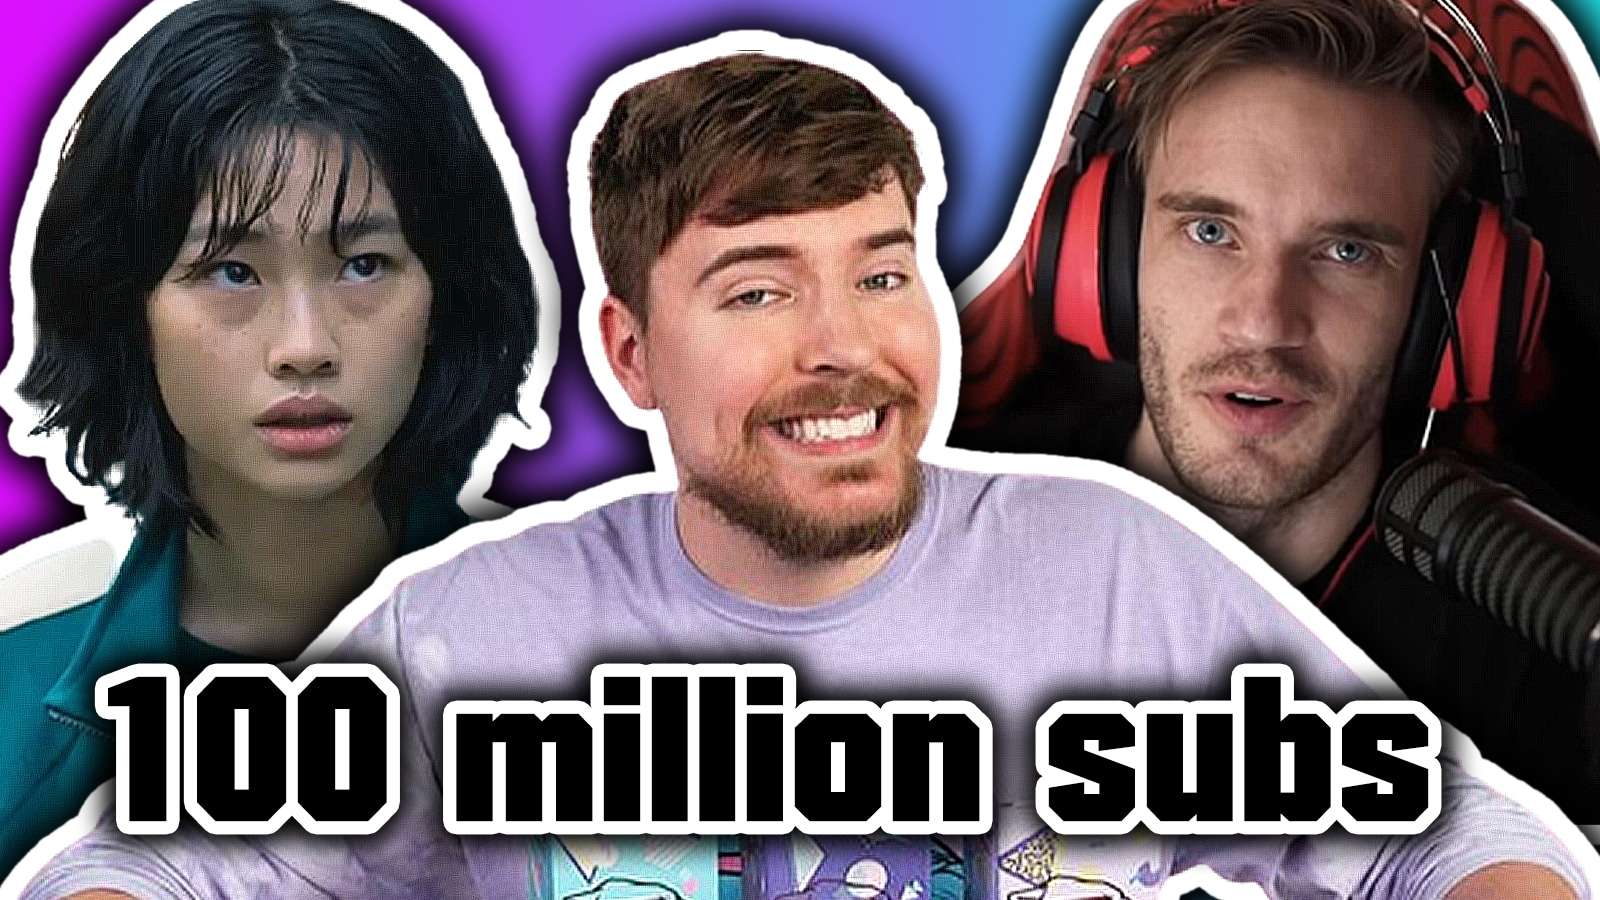 Top 5 mrbeast moments on road to 100 million subscribers